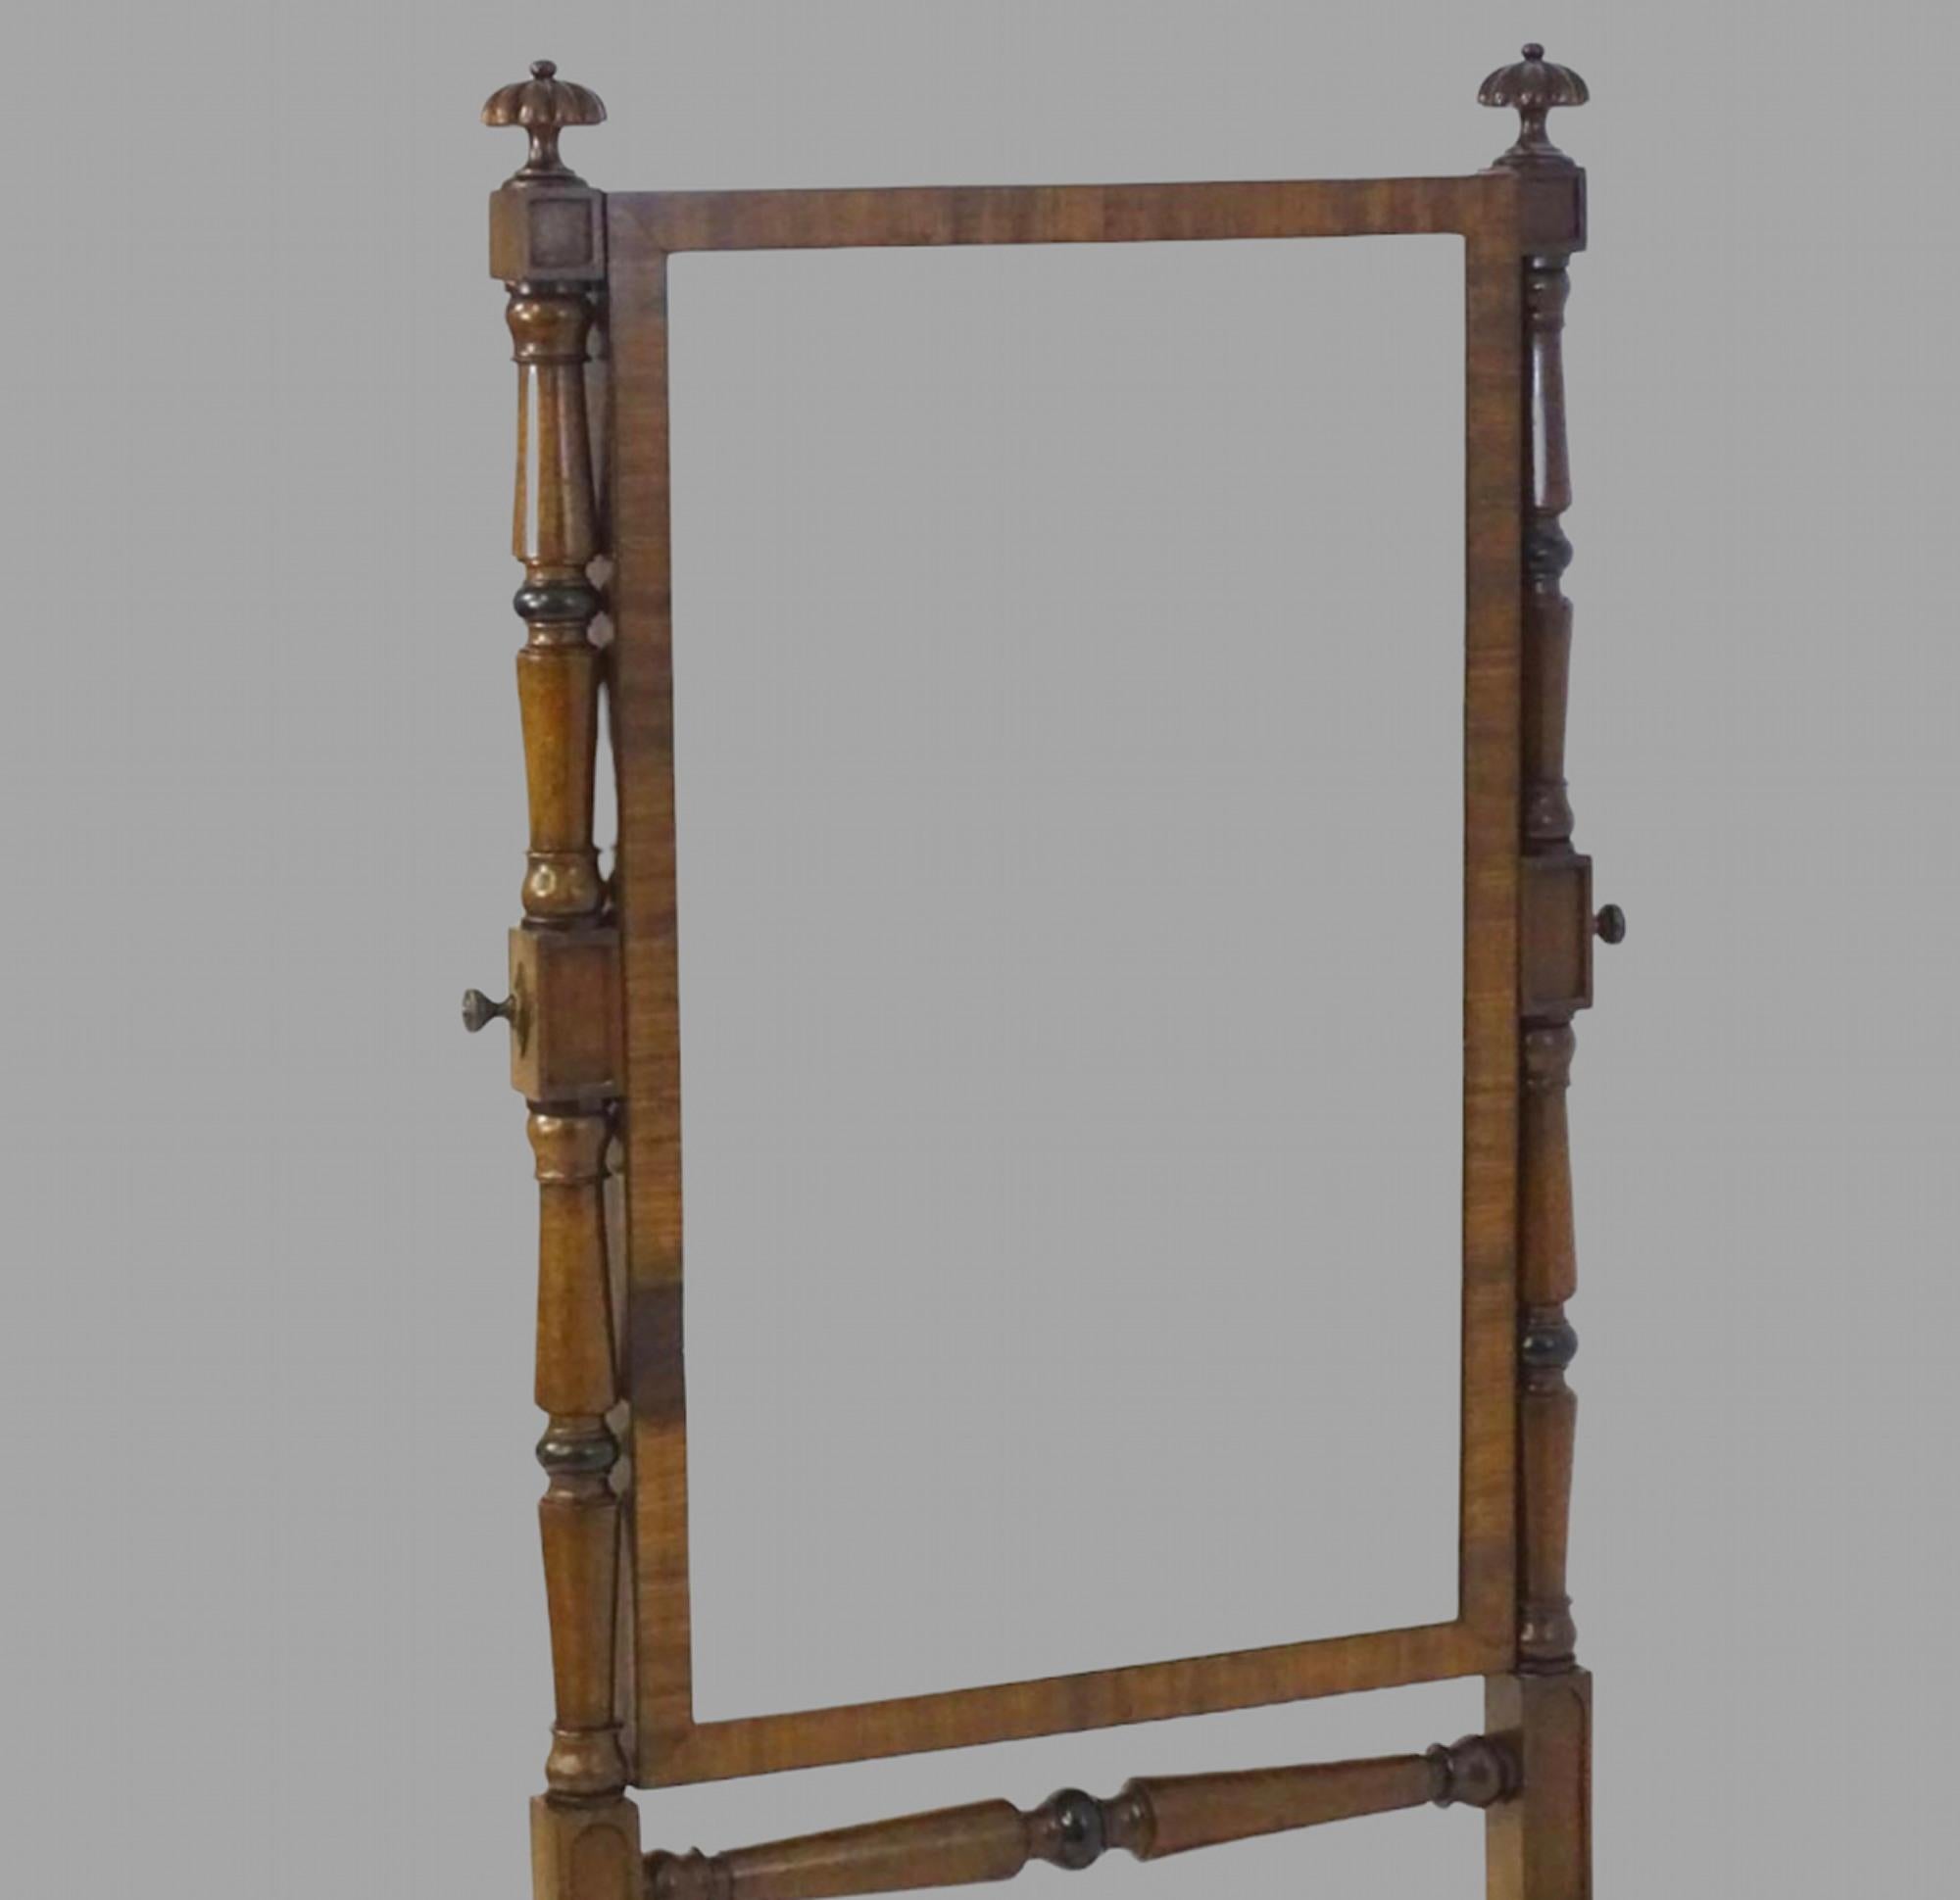 An early 19thc mahogany Cheval mirror surmounted by gadrooned finials above two turned tapering supports flanking a rectangular mirror and having four reeded cabriole legs supported by turned stretcher and castors.